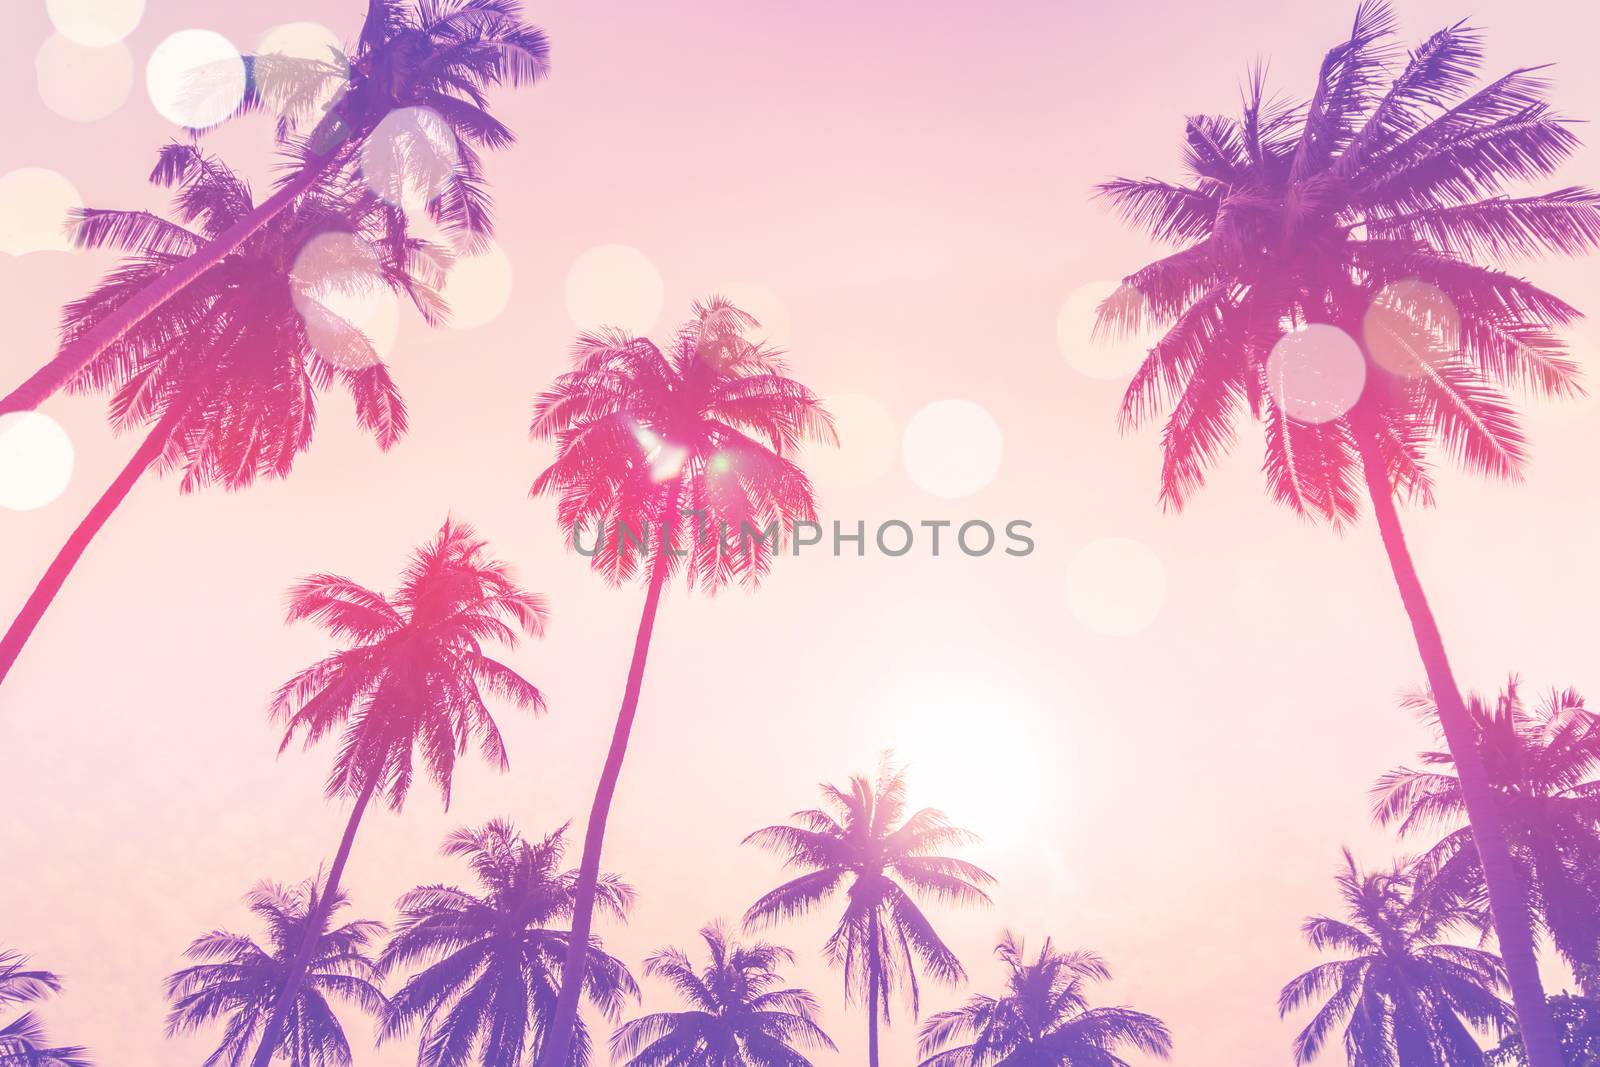 Tropical palm coconut trees on sunset sky flare and bokeh nature colorful fun background.